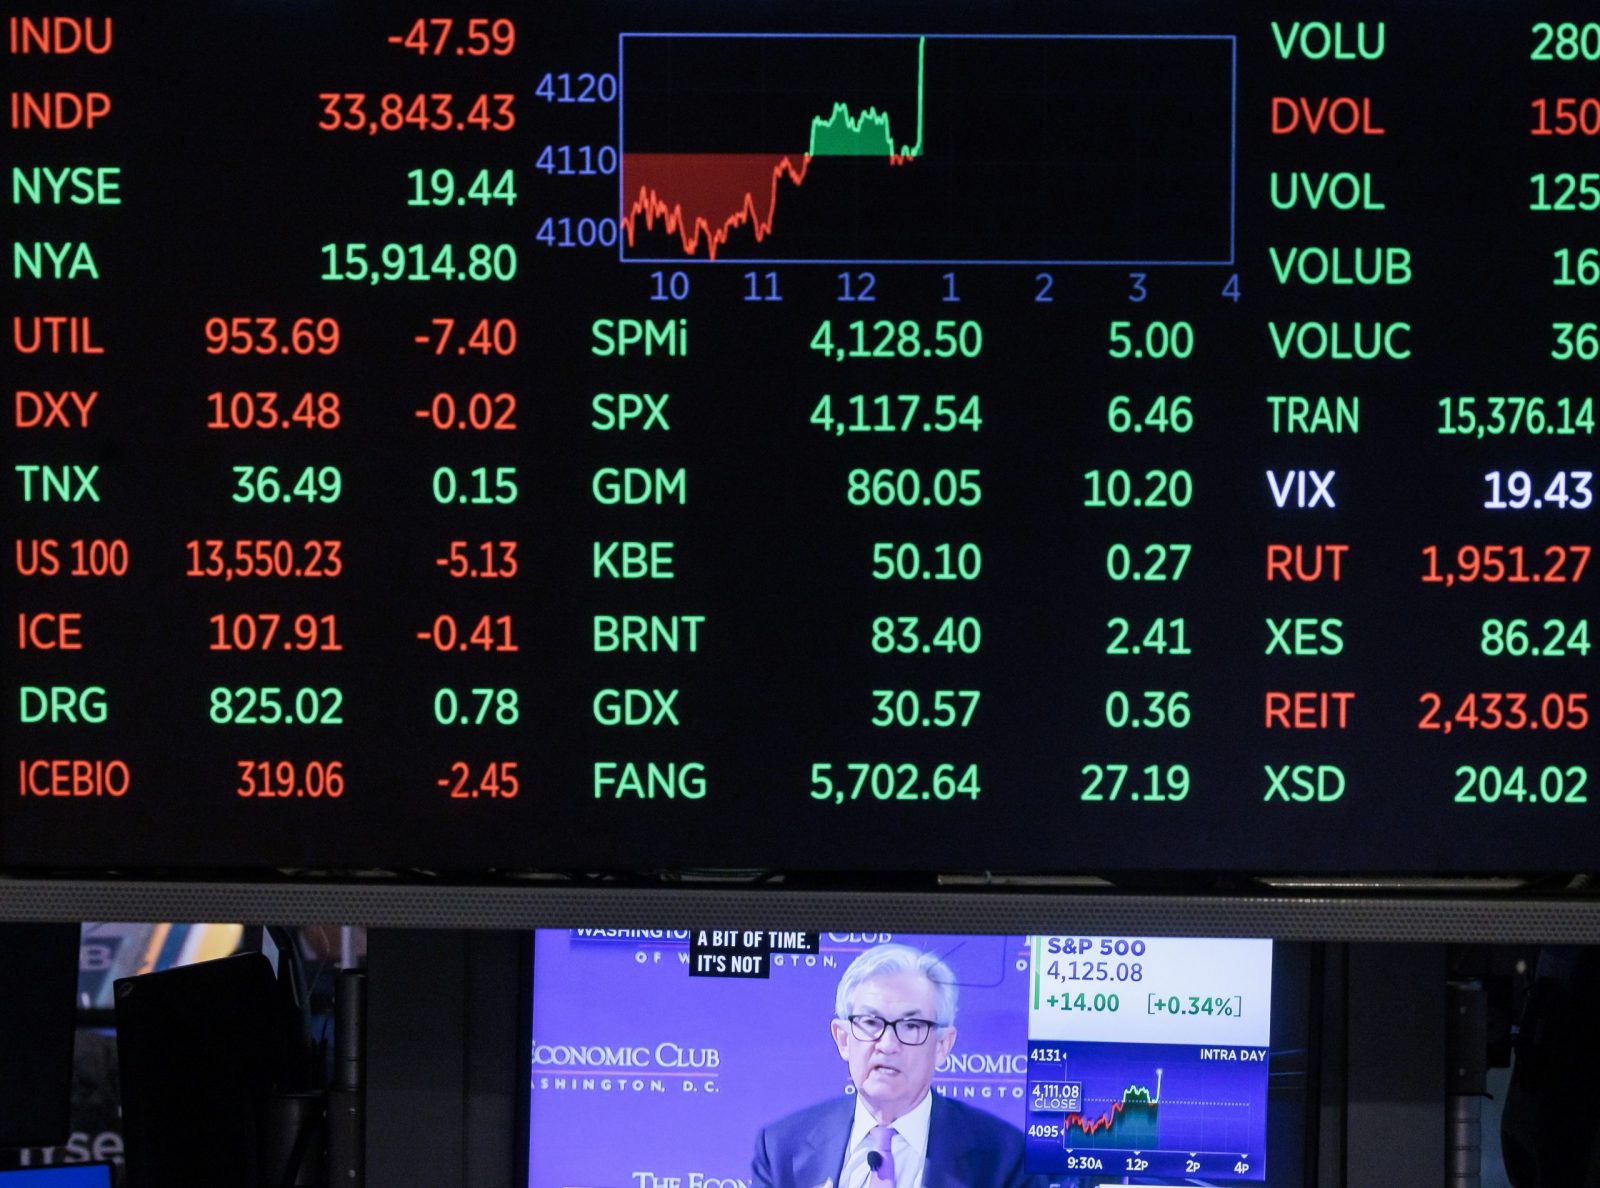 epa10453245 A screen shows coverage of a speech by US Federal Reserve chair Jerome Powell about the state of the US economy on the floor of the New York Stock Exchange in New York, New York, USA, on 07 February 2023.  EPA/JUSTIN LANE